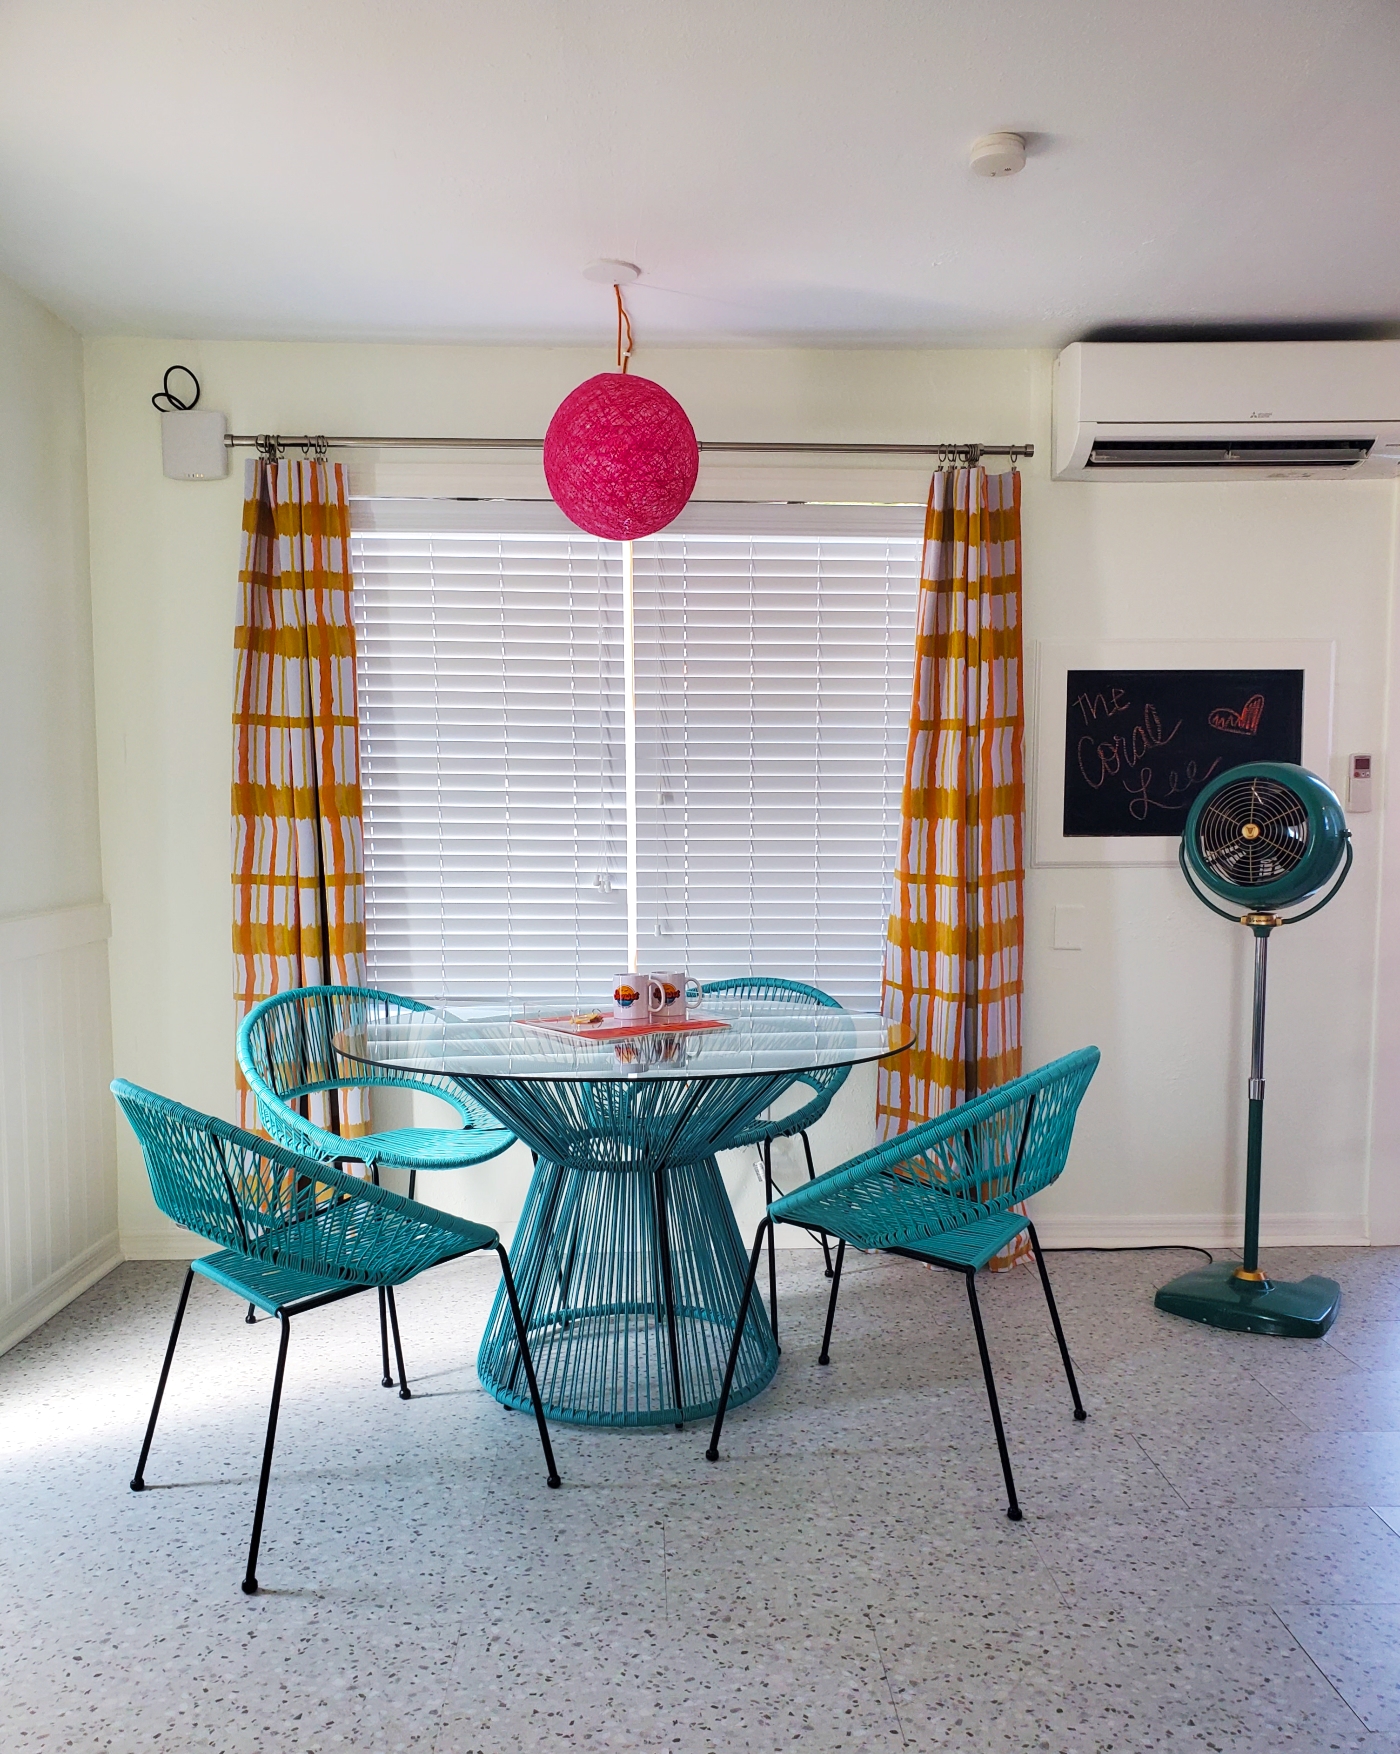 The Coral Lee dining table, chairs, bright patterned curtains and hot pink globe chandelier.